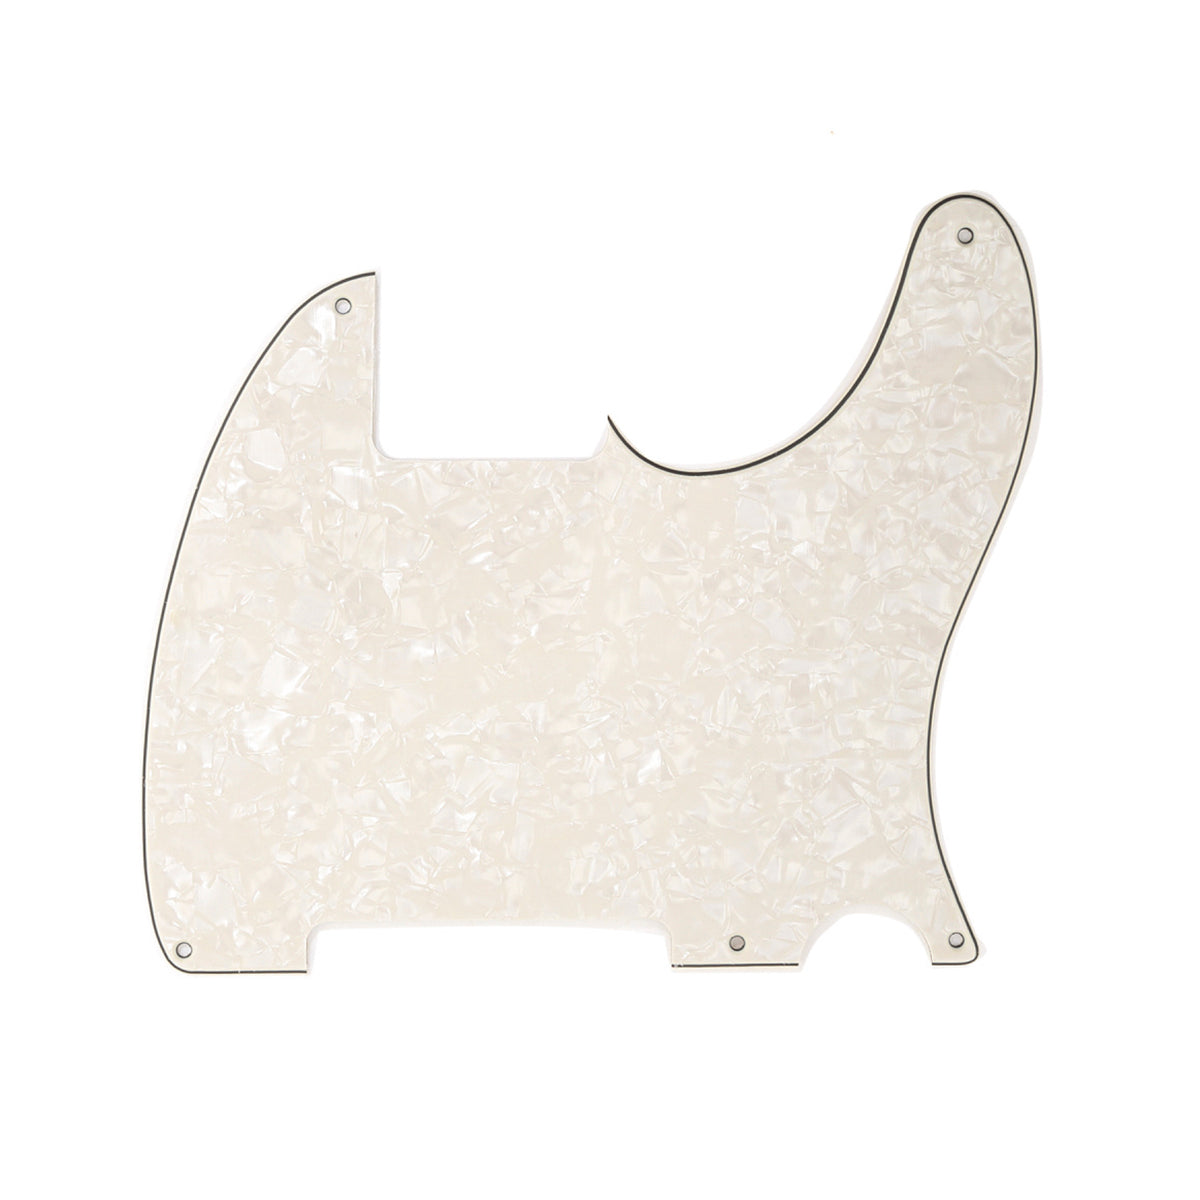 Musiclily 5 Hole Tele Pickguard Blank for Fender USA/Mexican Telecaster Esquire Guitar, 4Ply Parchment Pearl